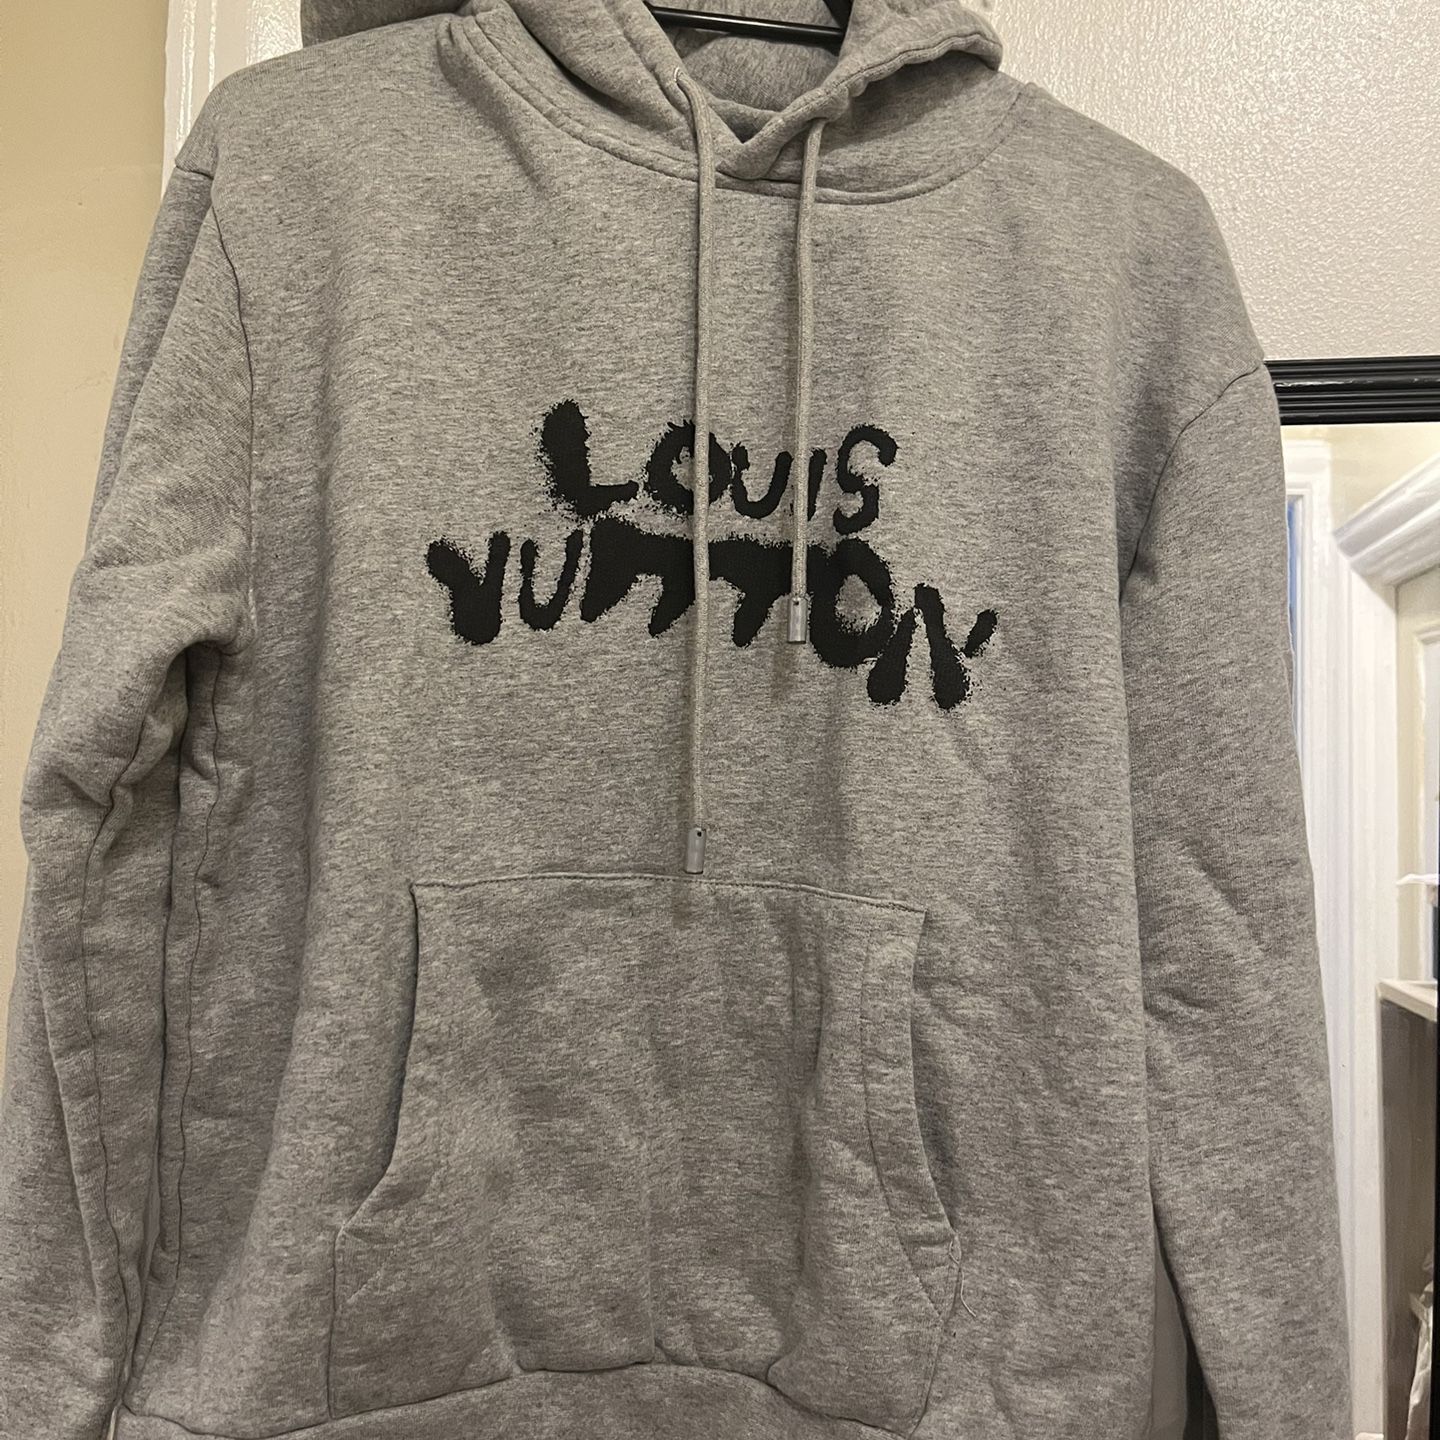 Louis Vuitton “Neon Working Man” Hoodie for Sale in New York, NY